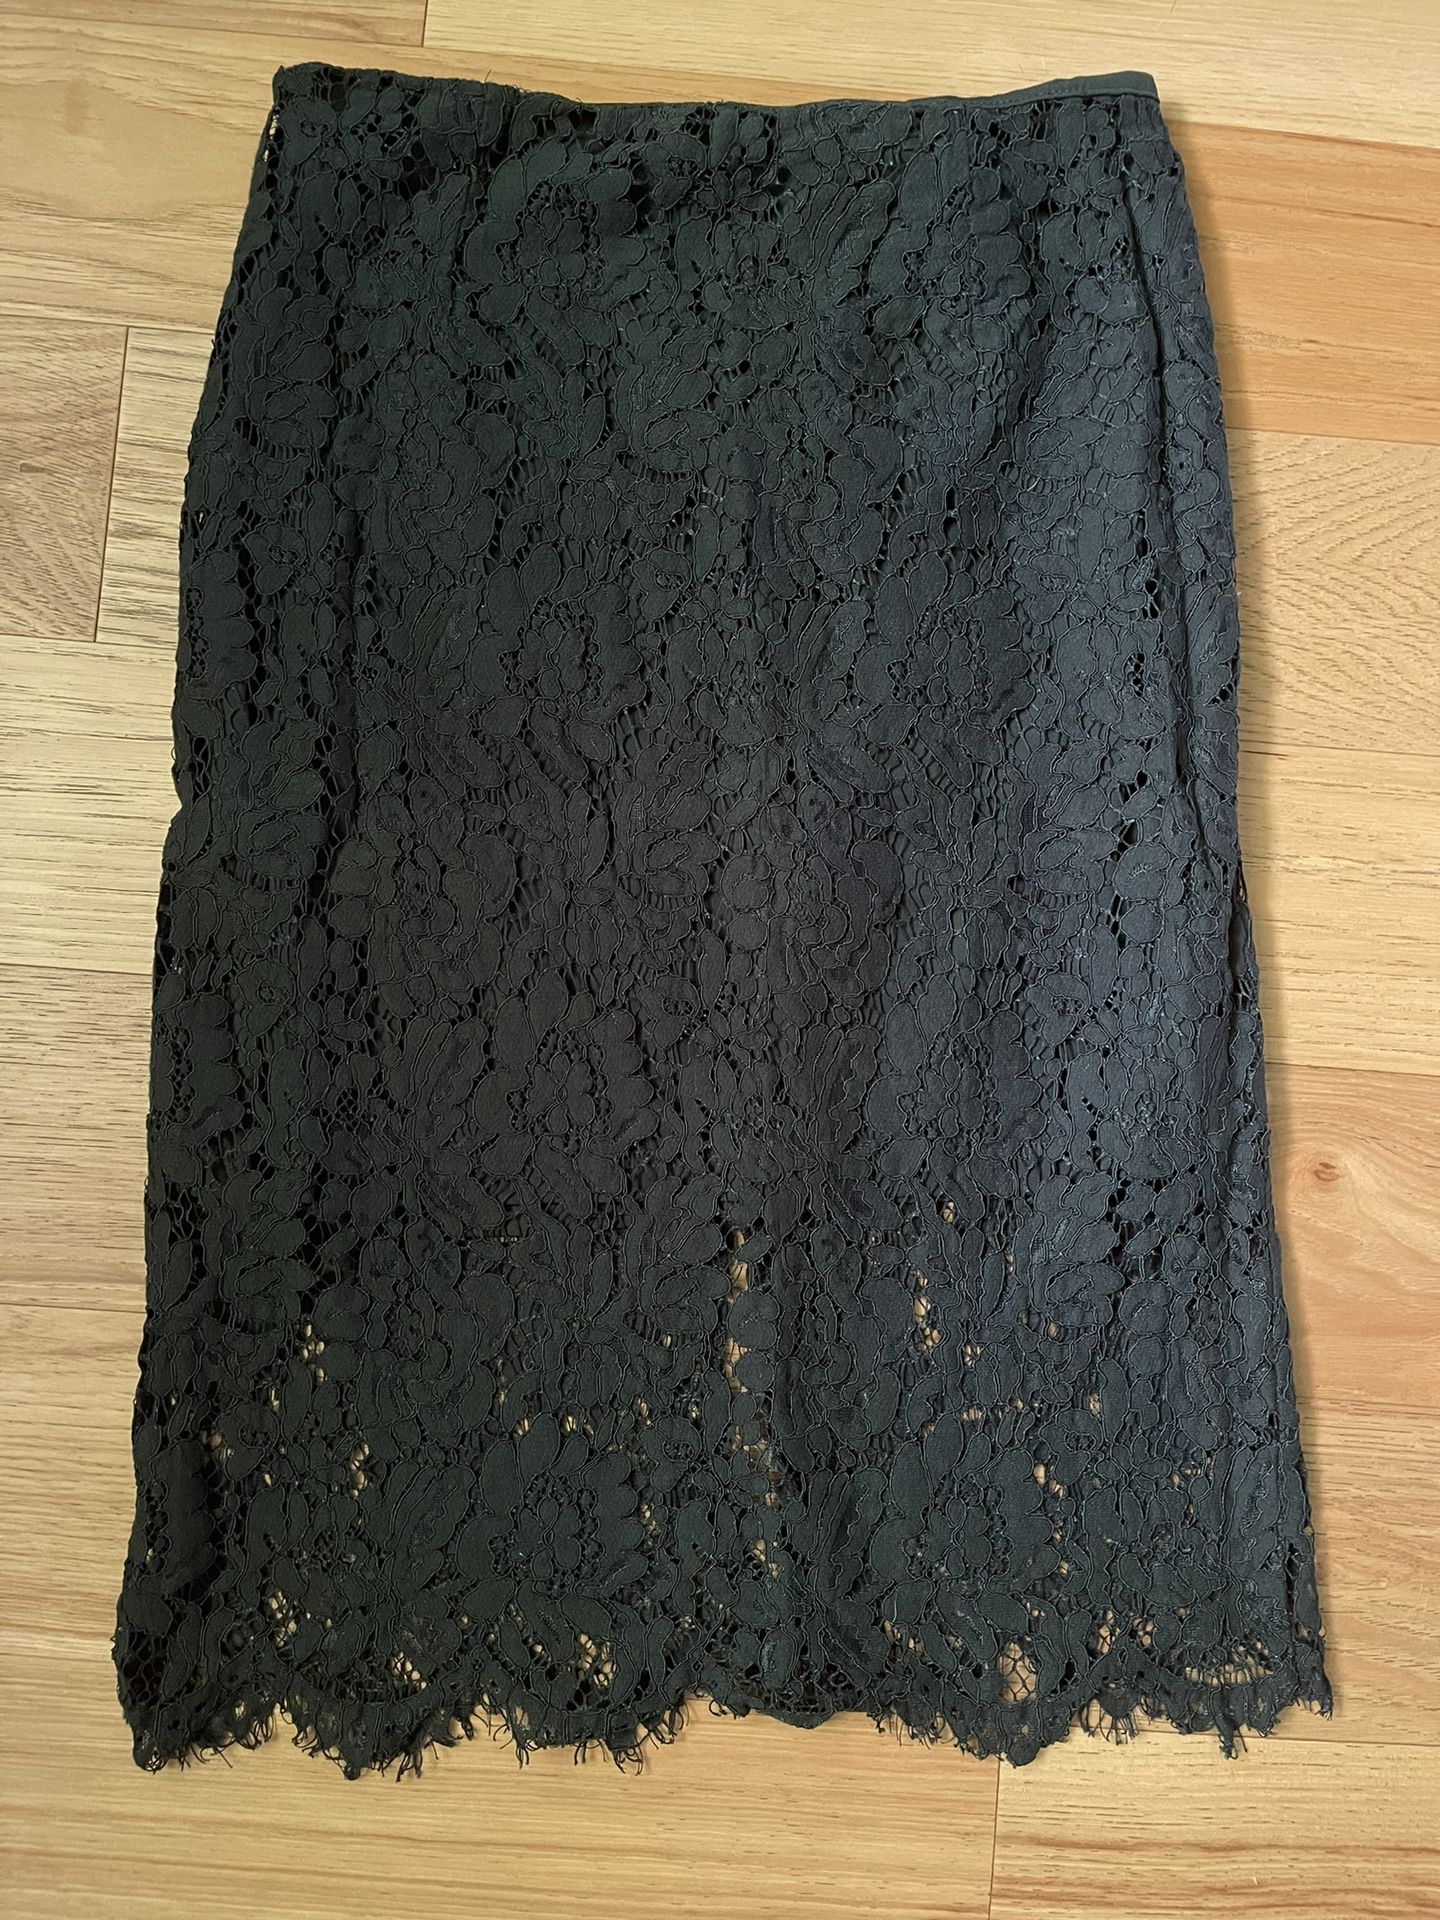 Gorgeous Dark Green Lace Pencil Skirt - Large